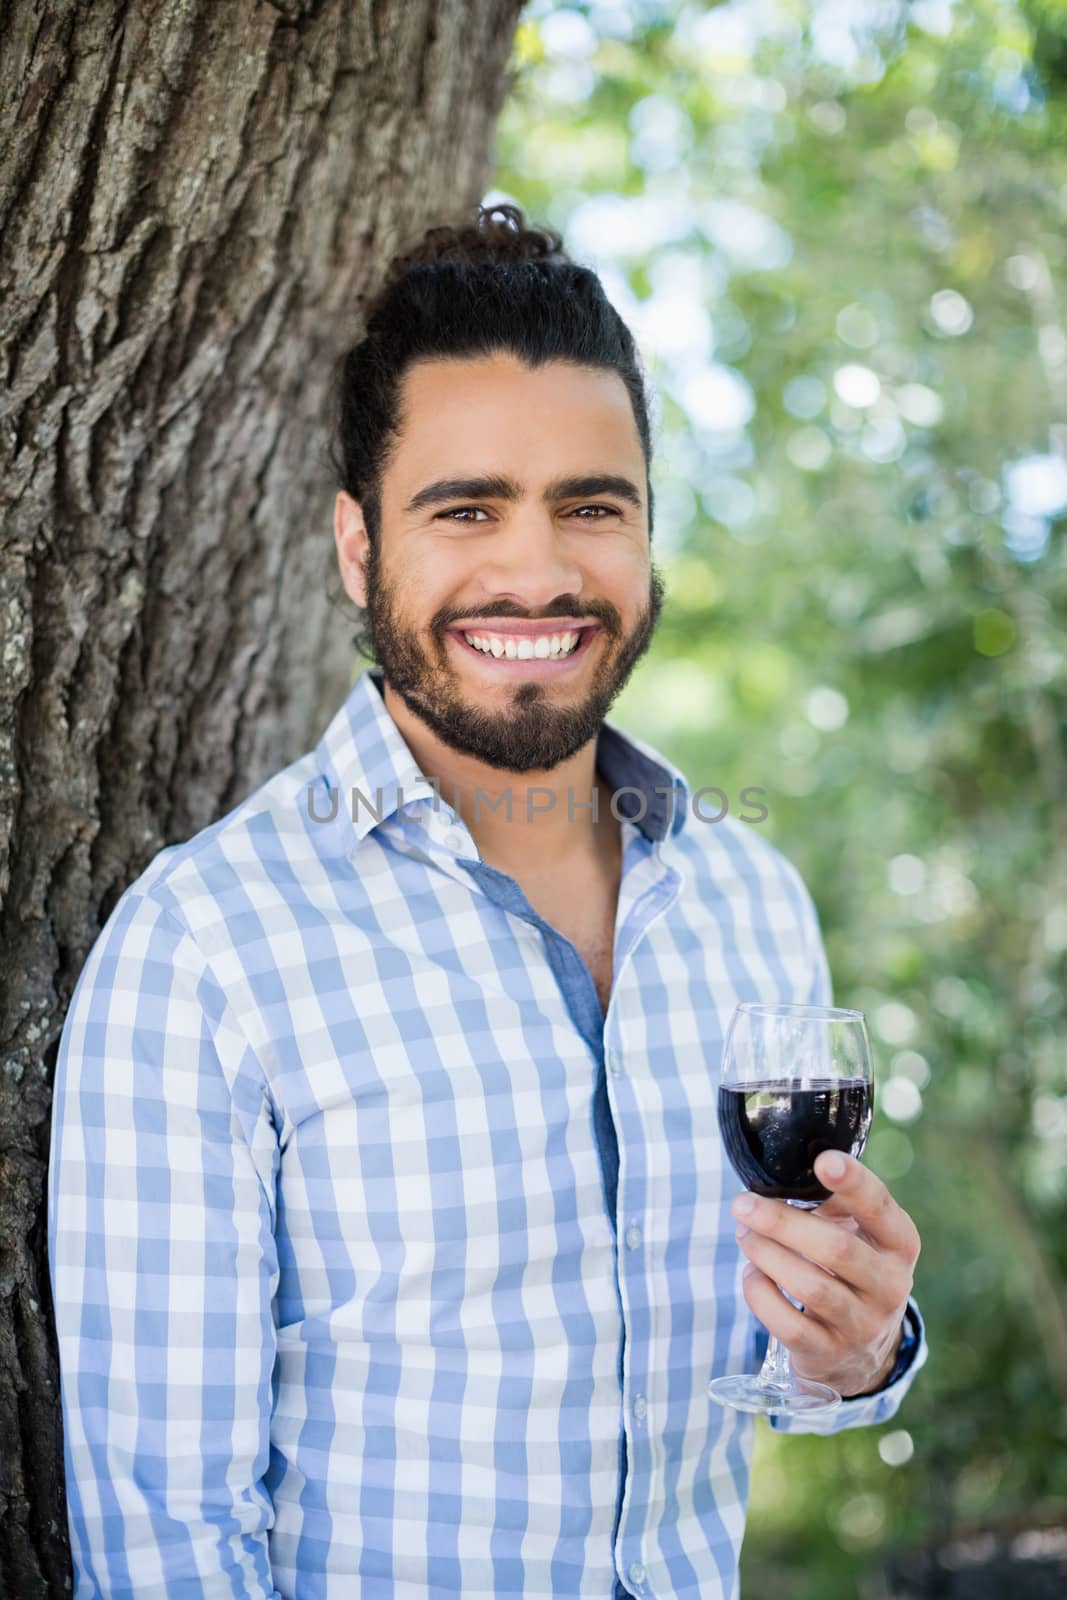 Portrait of man holding a glass of wine in the park on a sunny day